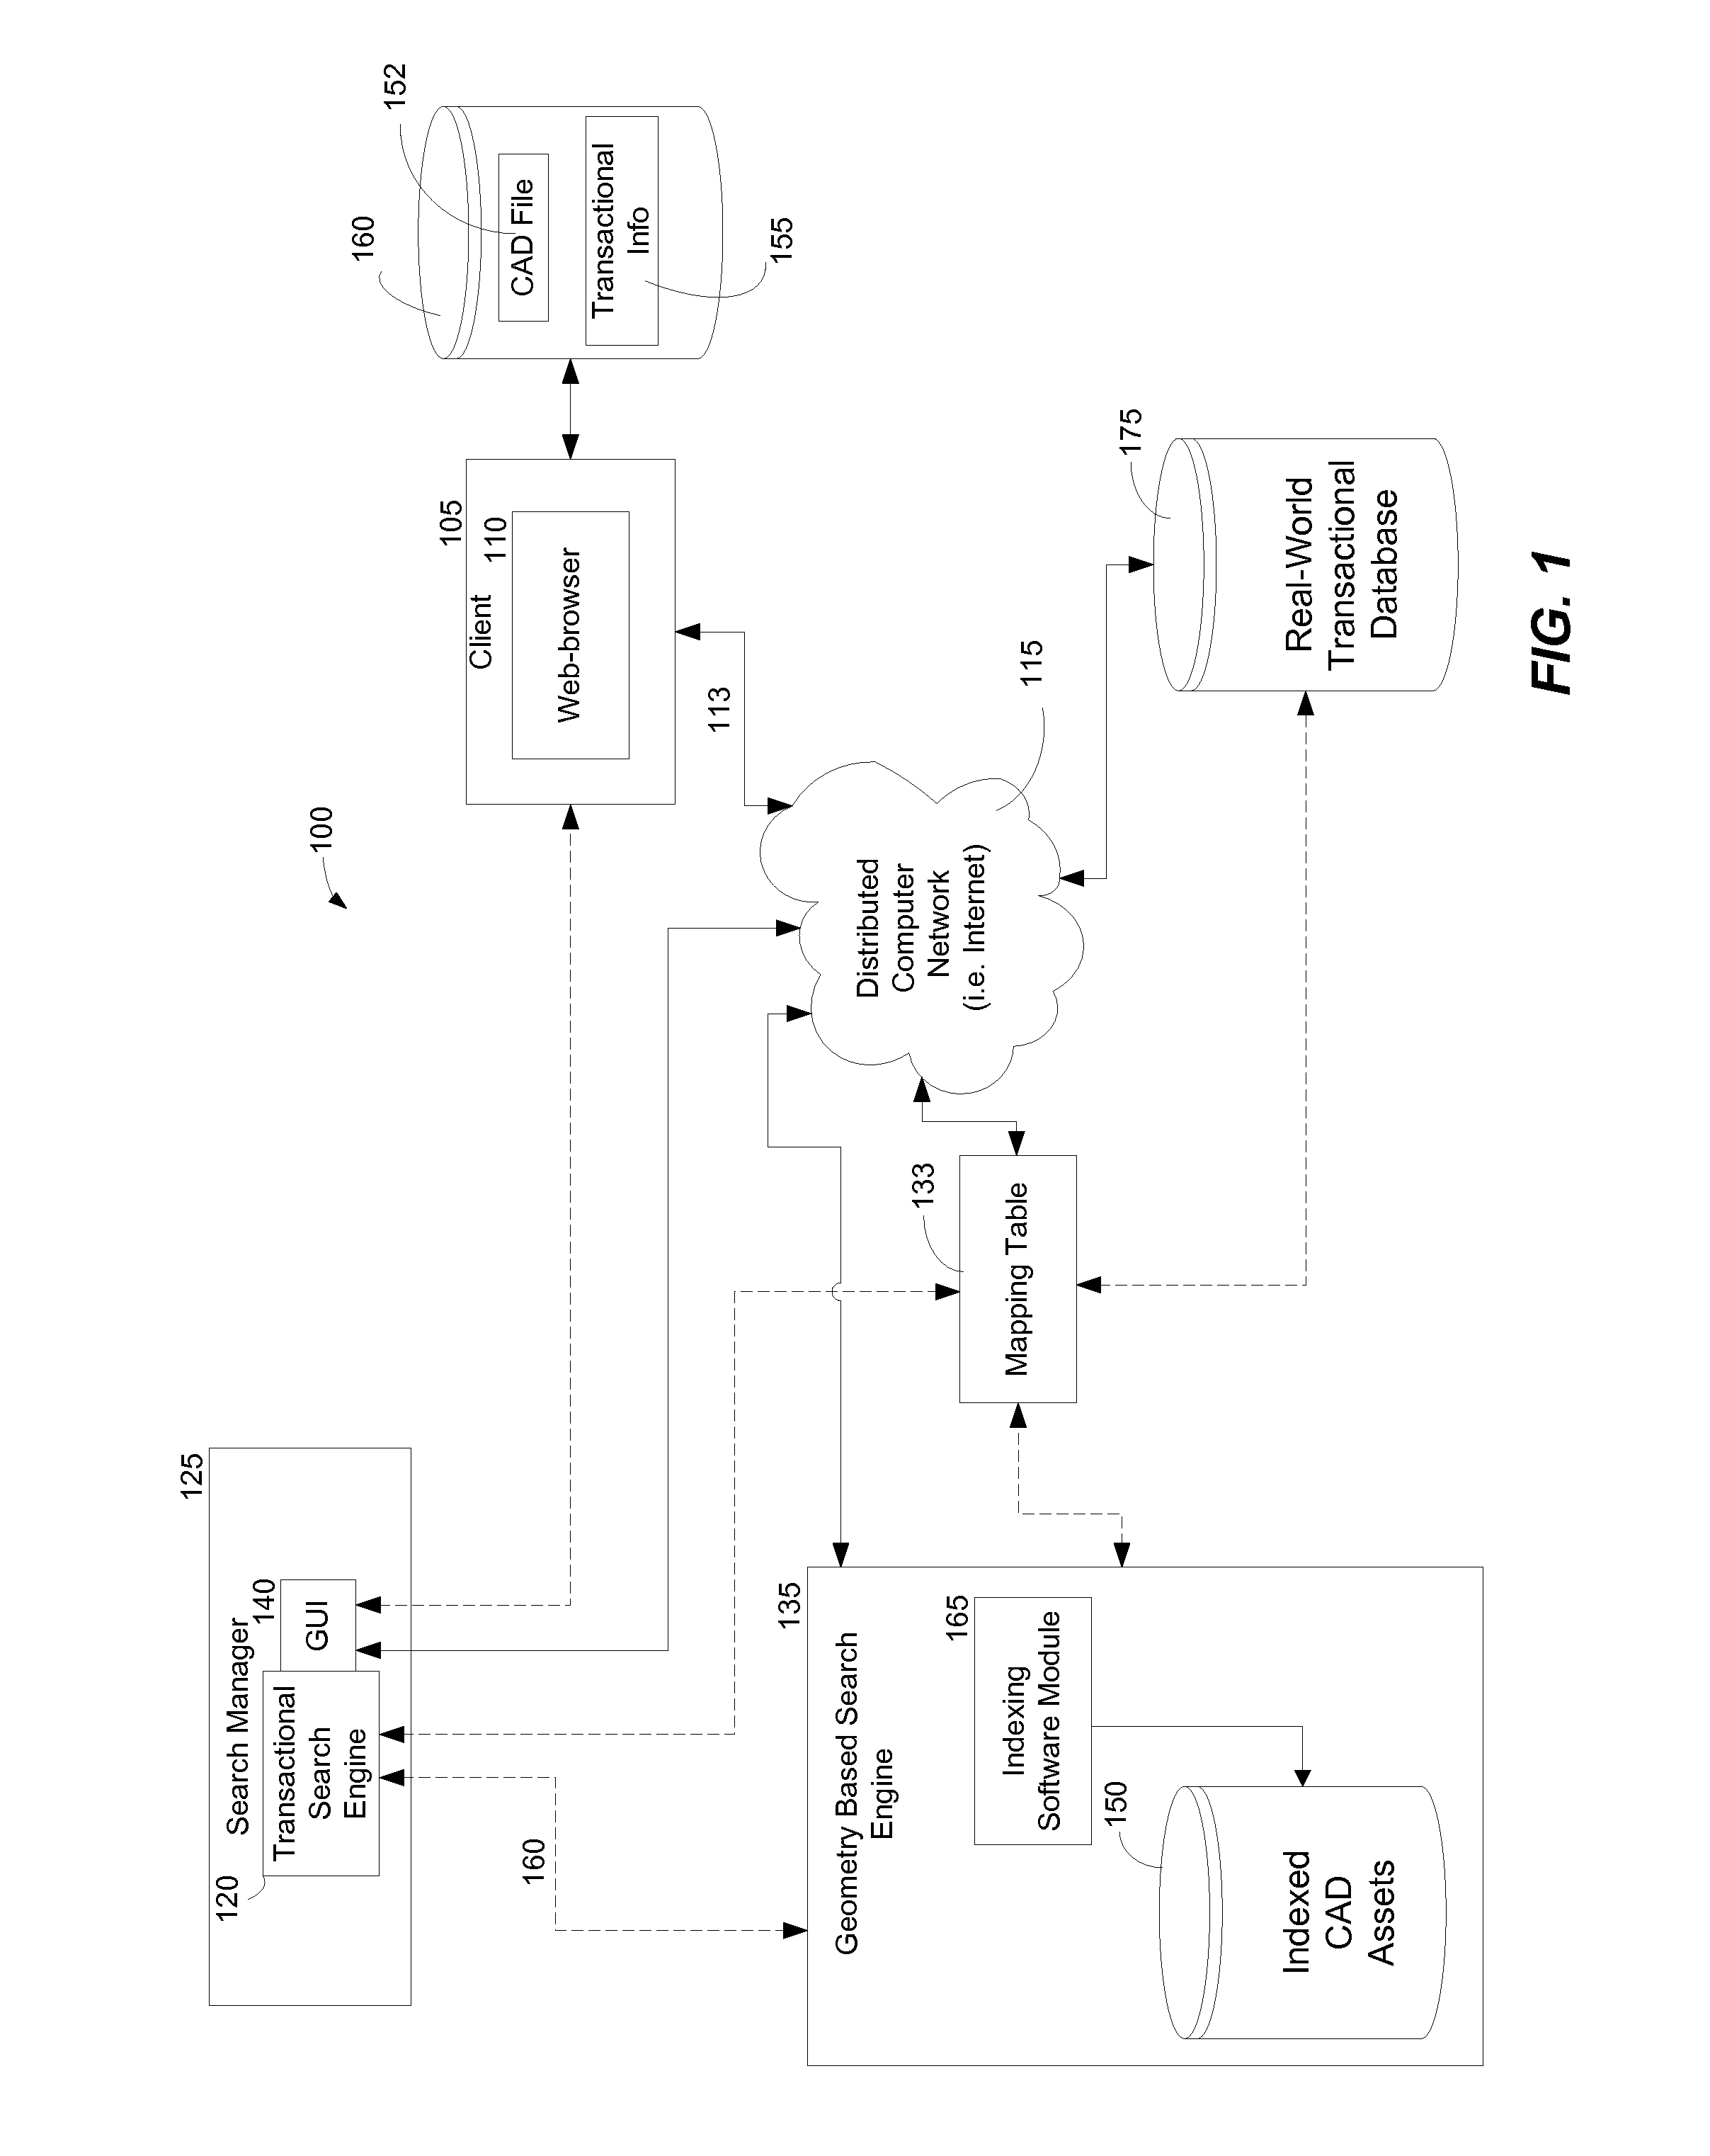 Computer system and method for providing real-world market-based information corresponding with a theoretical cad model and/or rfq/rfp data